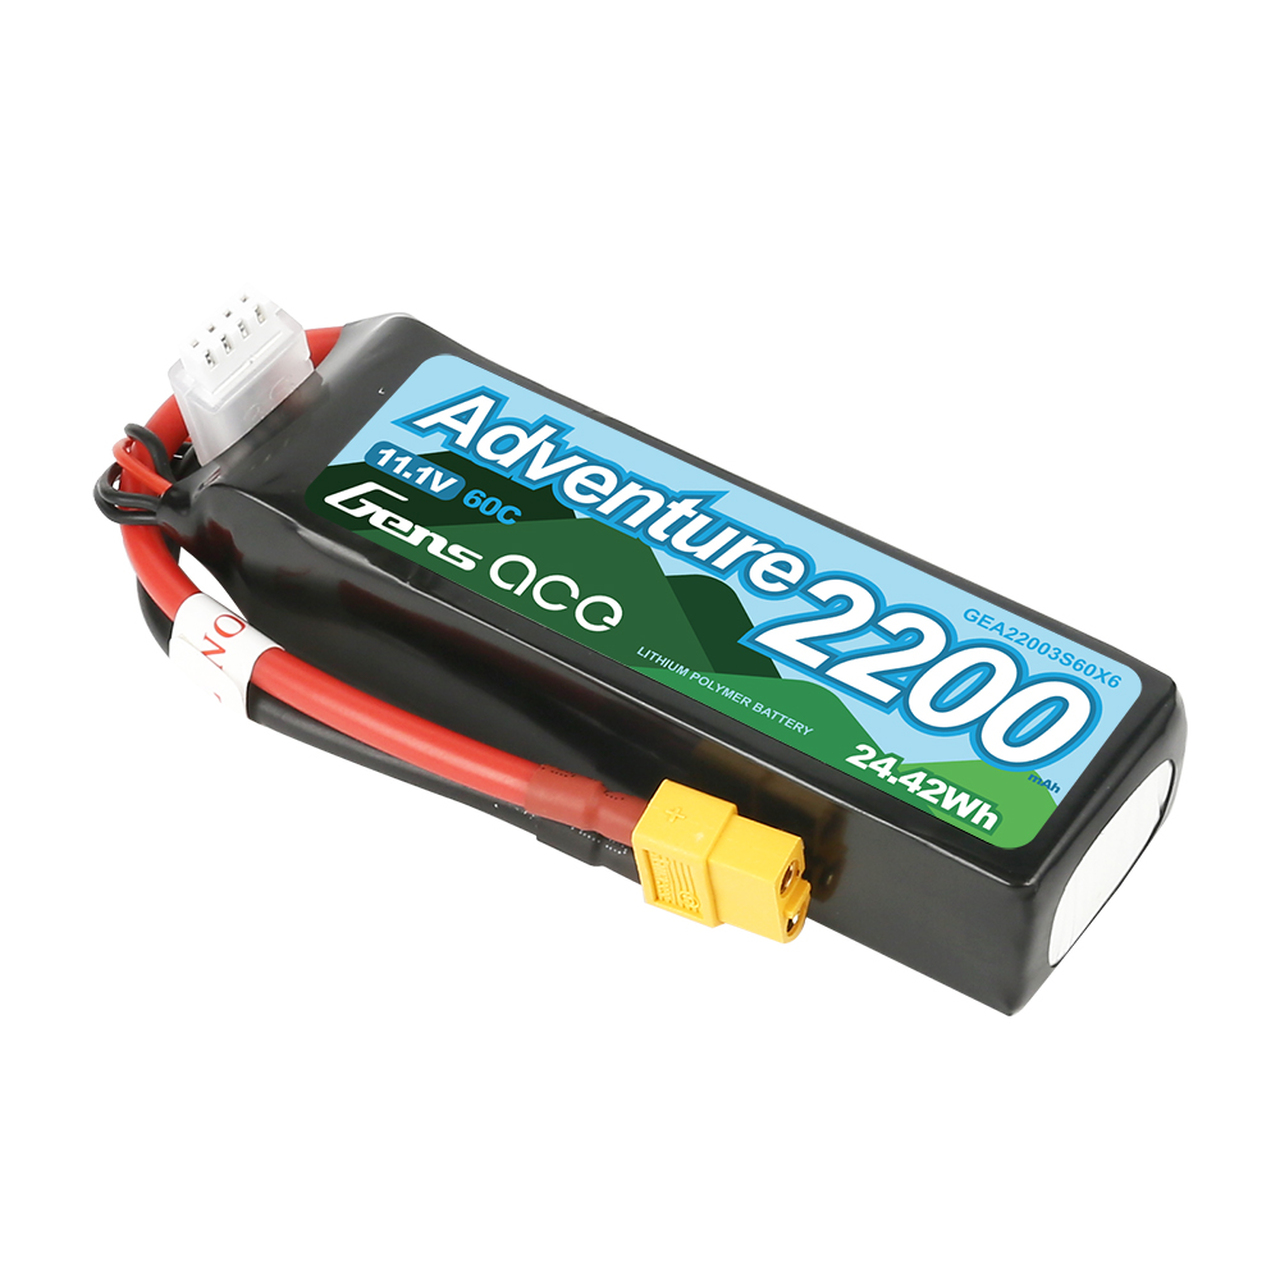 Gens Ace Adventure 2200mAh 3S1P 11.1V 60C Lipo Battery Pack with XT60 Plug for RC Crawler